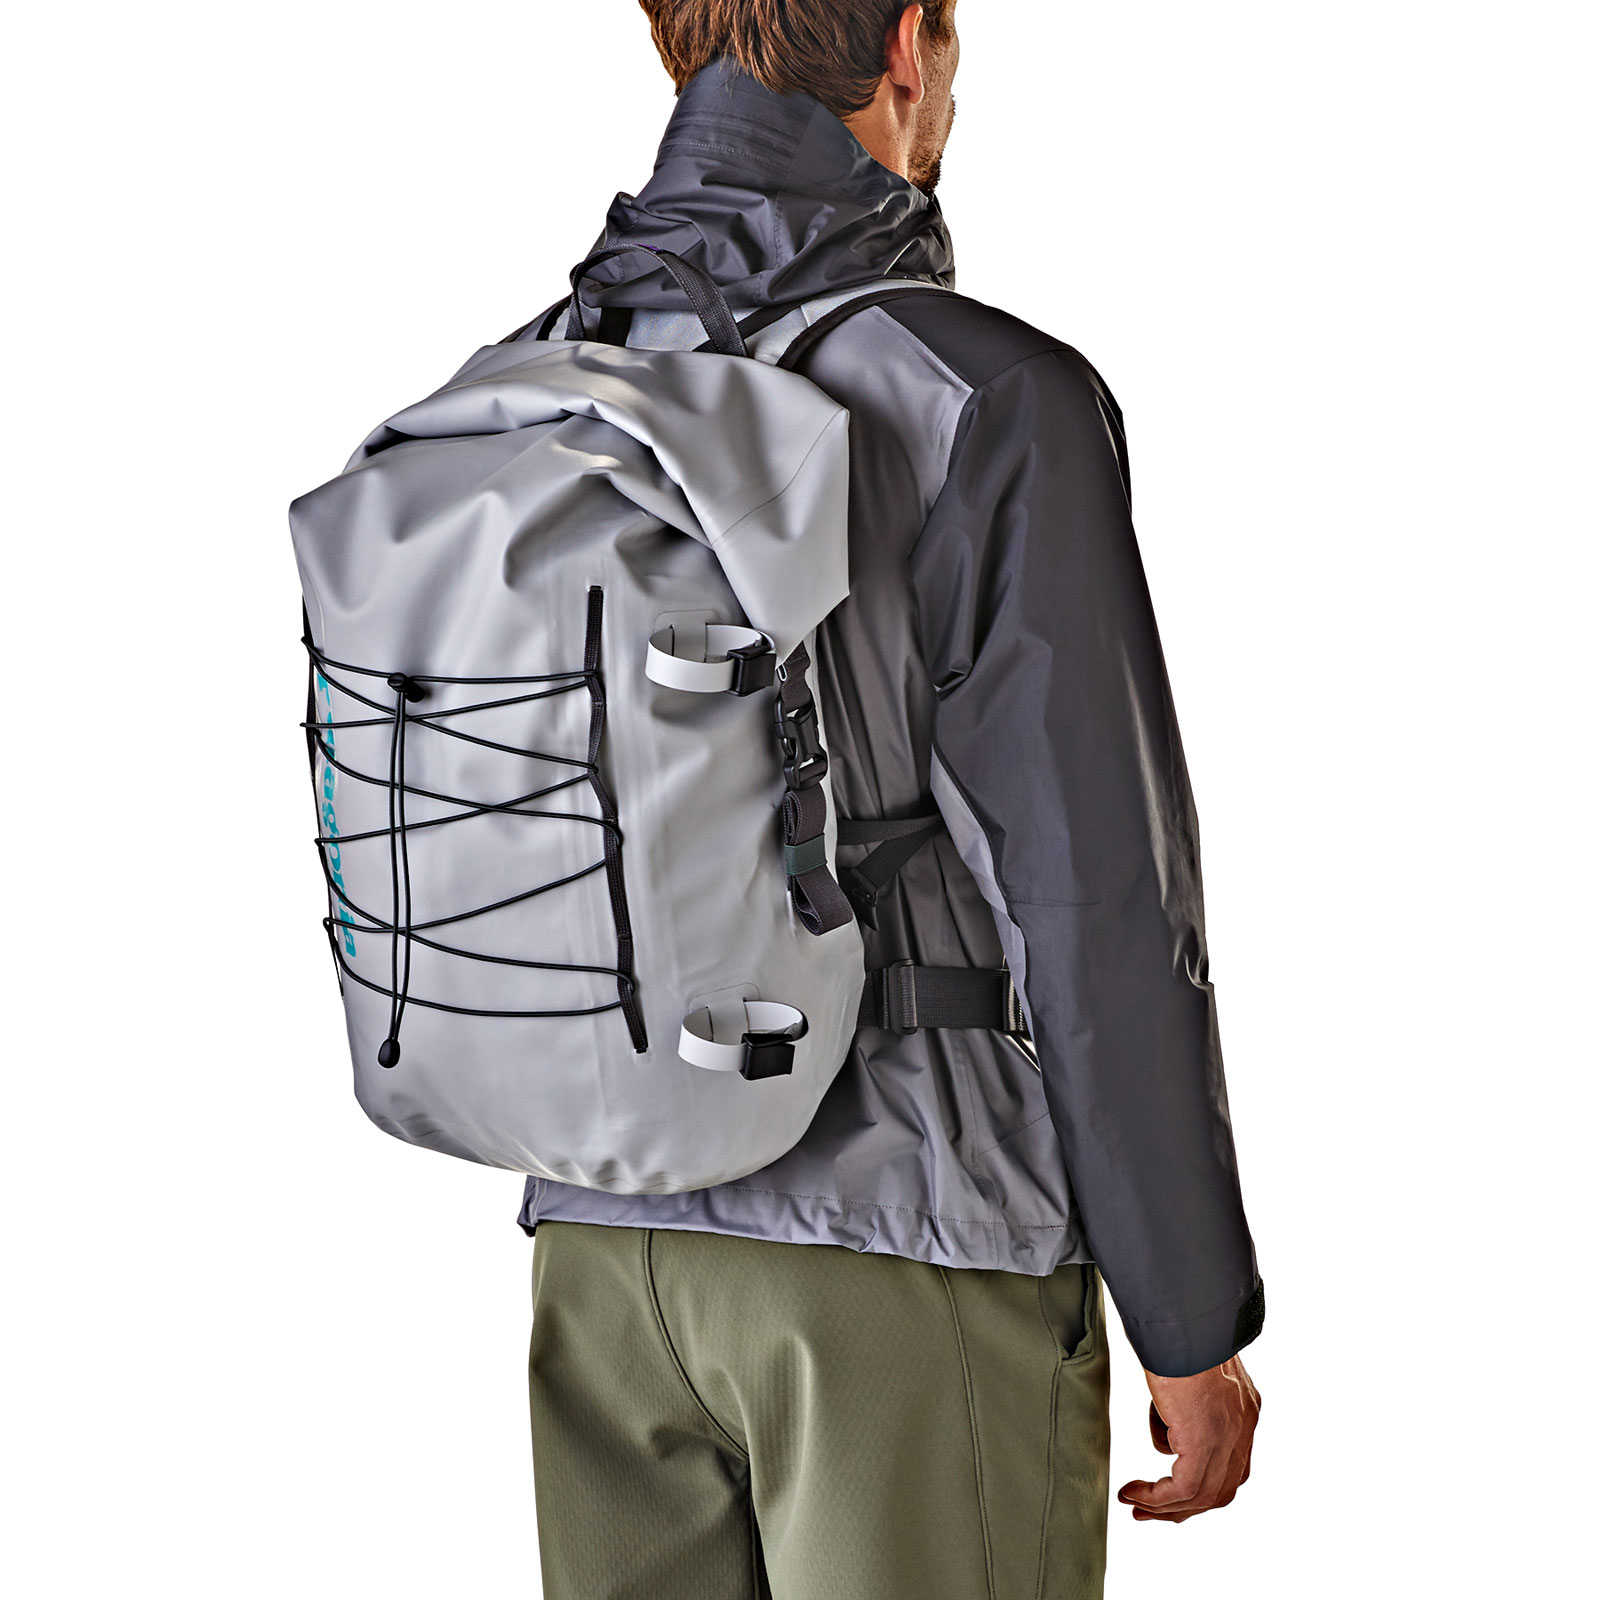 Patagonia Stormfront Roll Top Pack - AvidMax